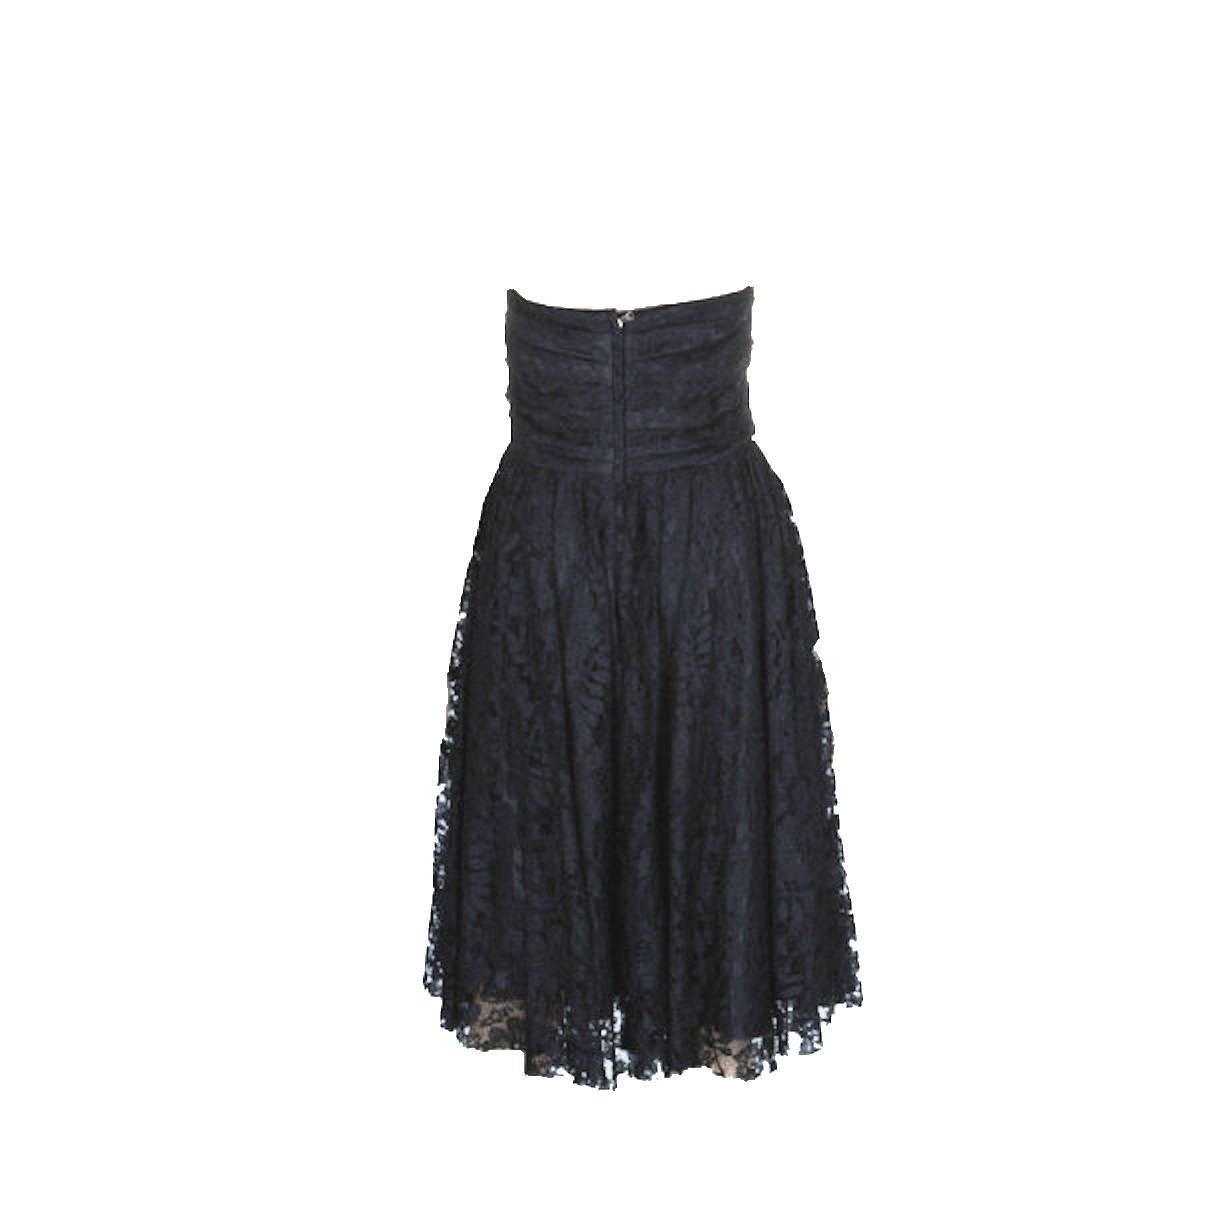 GORGEOUS DOLCE & GABBANA BLACK LACE DRESS

This beautiful dress is an absolute IT-PIECE and loved by Blake Lively, Tamara Ecclestone, Erin Heatherton and many other celebrities and top models as it is so ultra-glamouous

Condition: New with